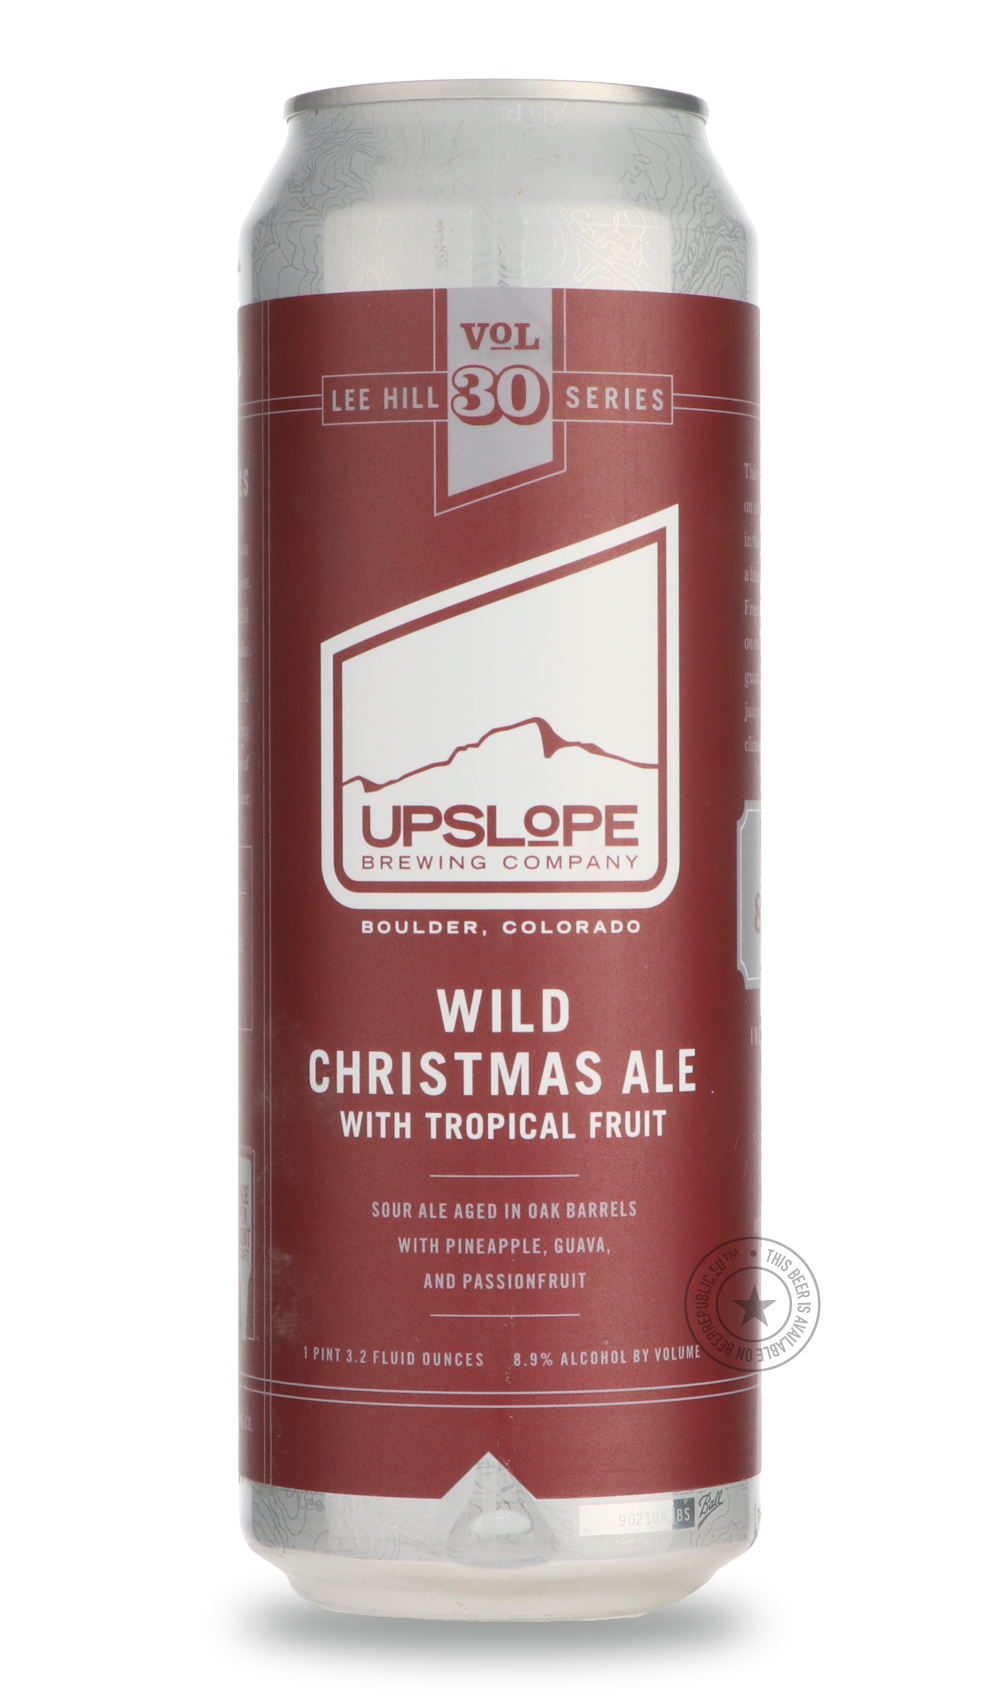 -Upslope- Lee Hill Vol. 30 Wild Christmas Ale With Tropical Fruit-Sour / Wild & Fruity- Only @ Beer Republic - The best online beer store for American & Canadian craft beer - Buy beer online from the USA and Canada - Bier online kopen - Amerikaans bier kopen - Craft beer store - Craft beer kopen - Amerikanisch bier kaufen - Bier online kaufen - Acheter biere online - IPA - Stout - Porter - New England IPA - Hazy IPA - Imperial Stout - Barrel Aged - Barrel Aged Imperial Stout - Brown - Dark beer - Blond - Bl